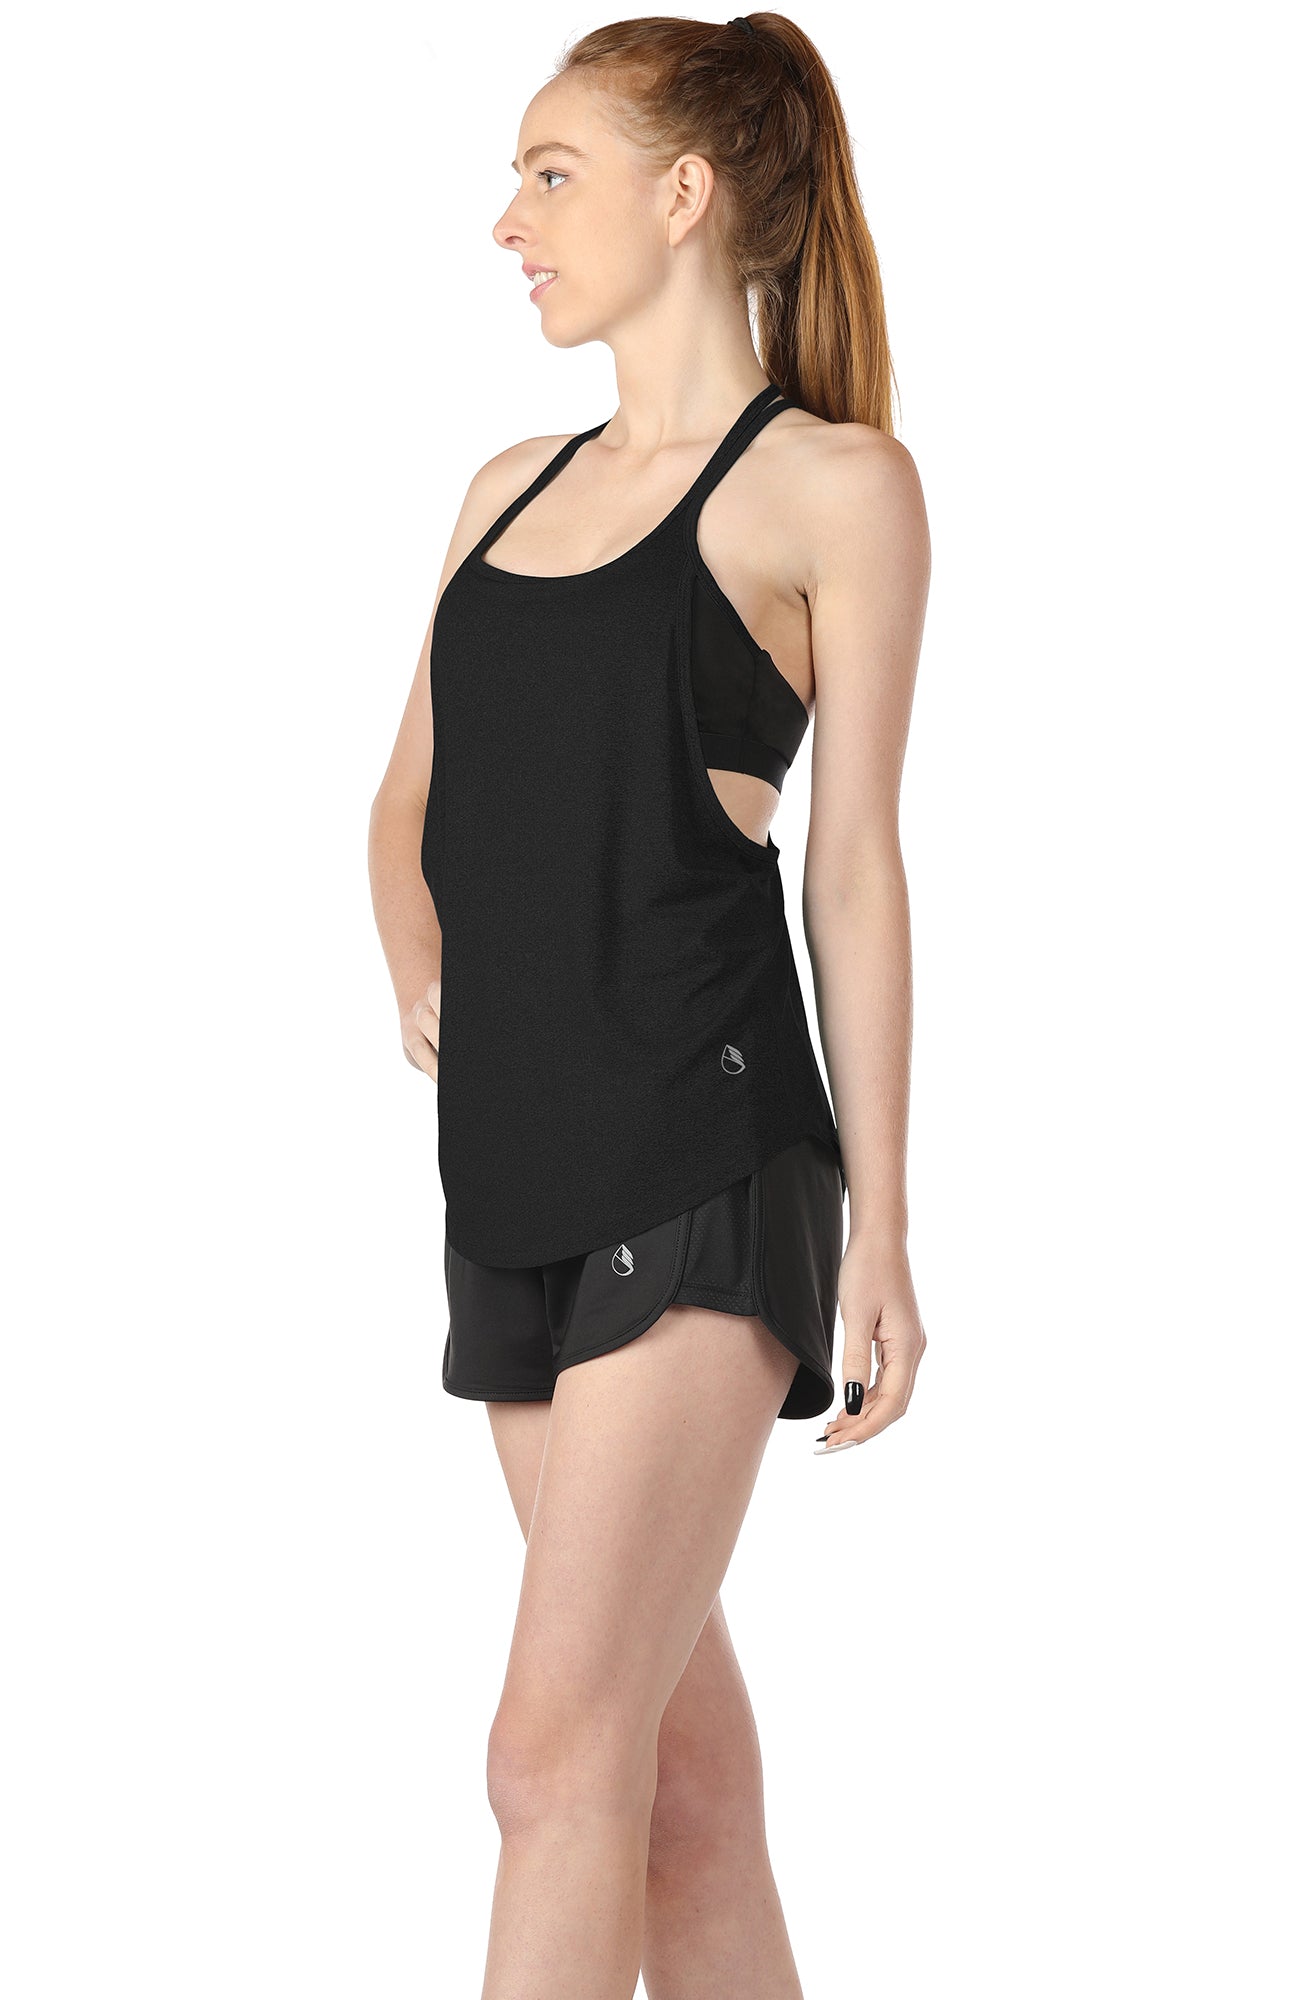 NANZU Women Yoga Tank Tops with Built in Bra Crop Sports Vests for Workout  Running Gym Home price in UAE,  UAE